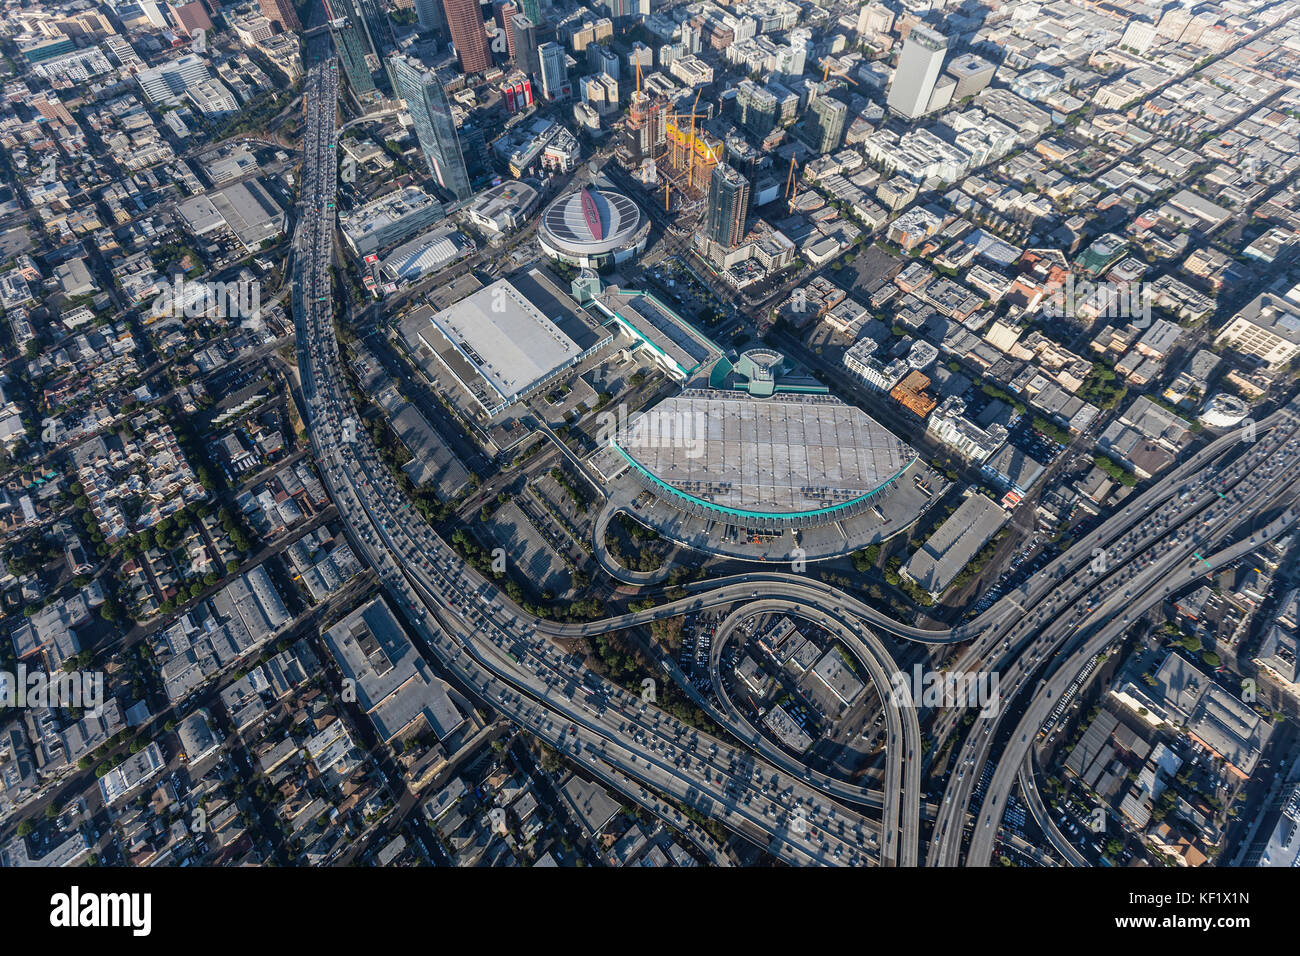 Los Angeles, California, USA - August 7, 2017:  Aerial view of Convention Center, freeways and South Park neighborhood in downtown Los Angeles. Stock Photo